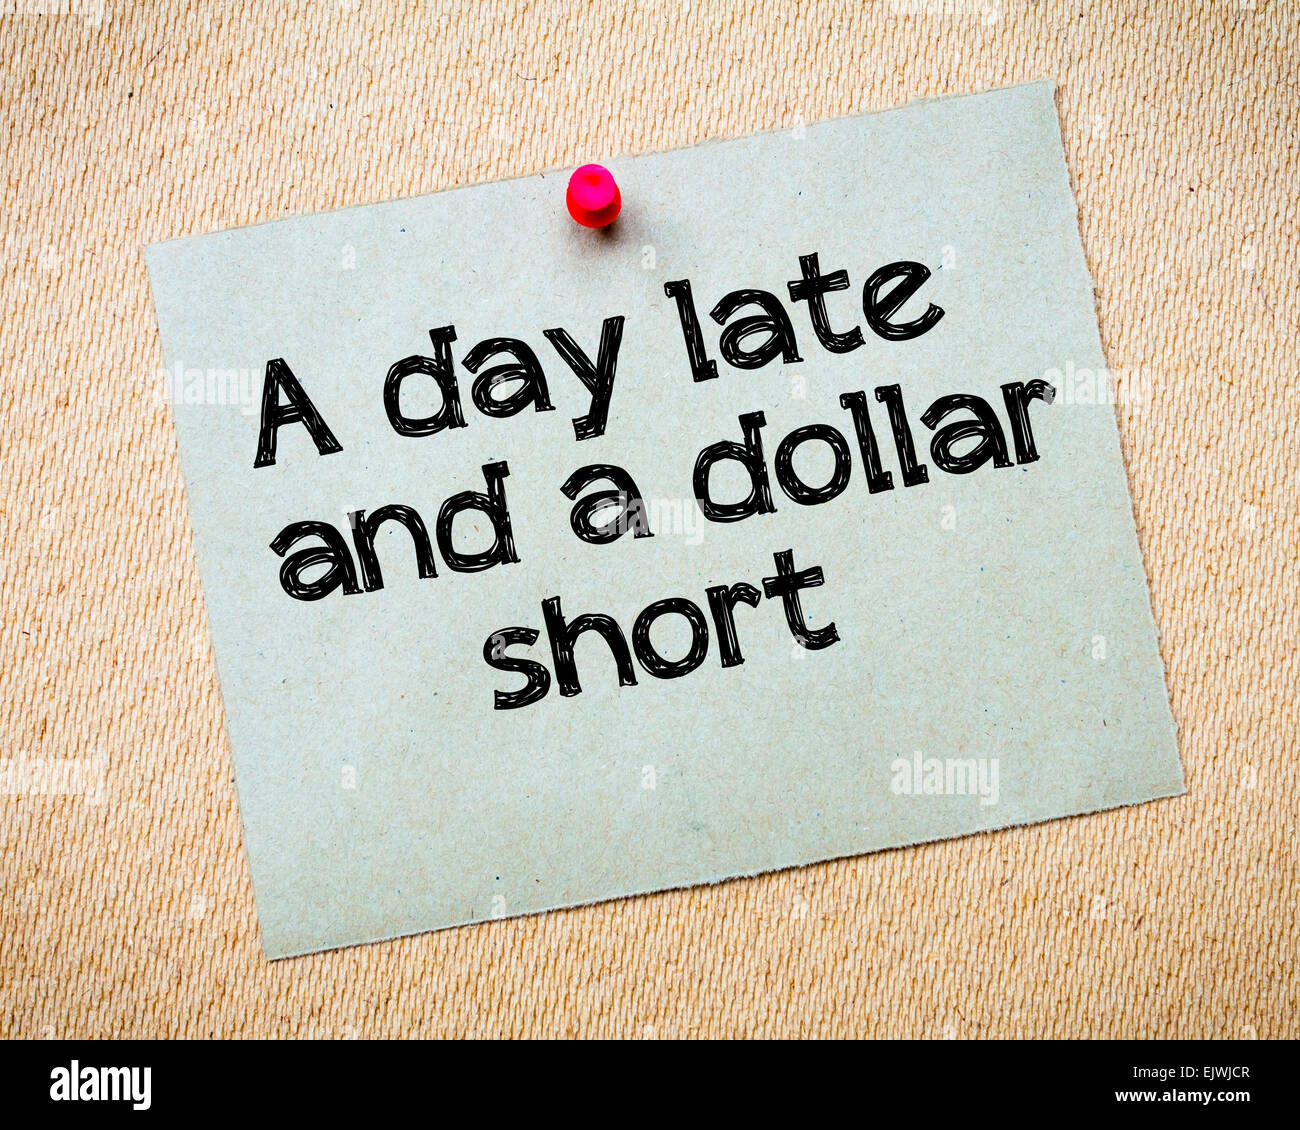 A day late and a dollar short Message. Recycled paper note pinned on cork board. Concept Image Stock Photo